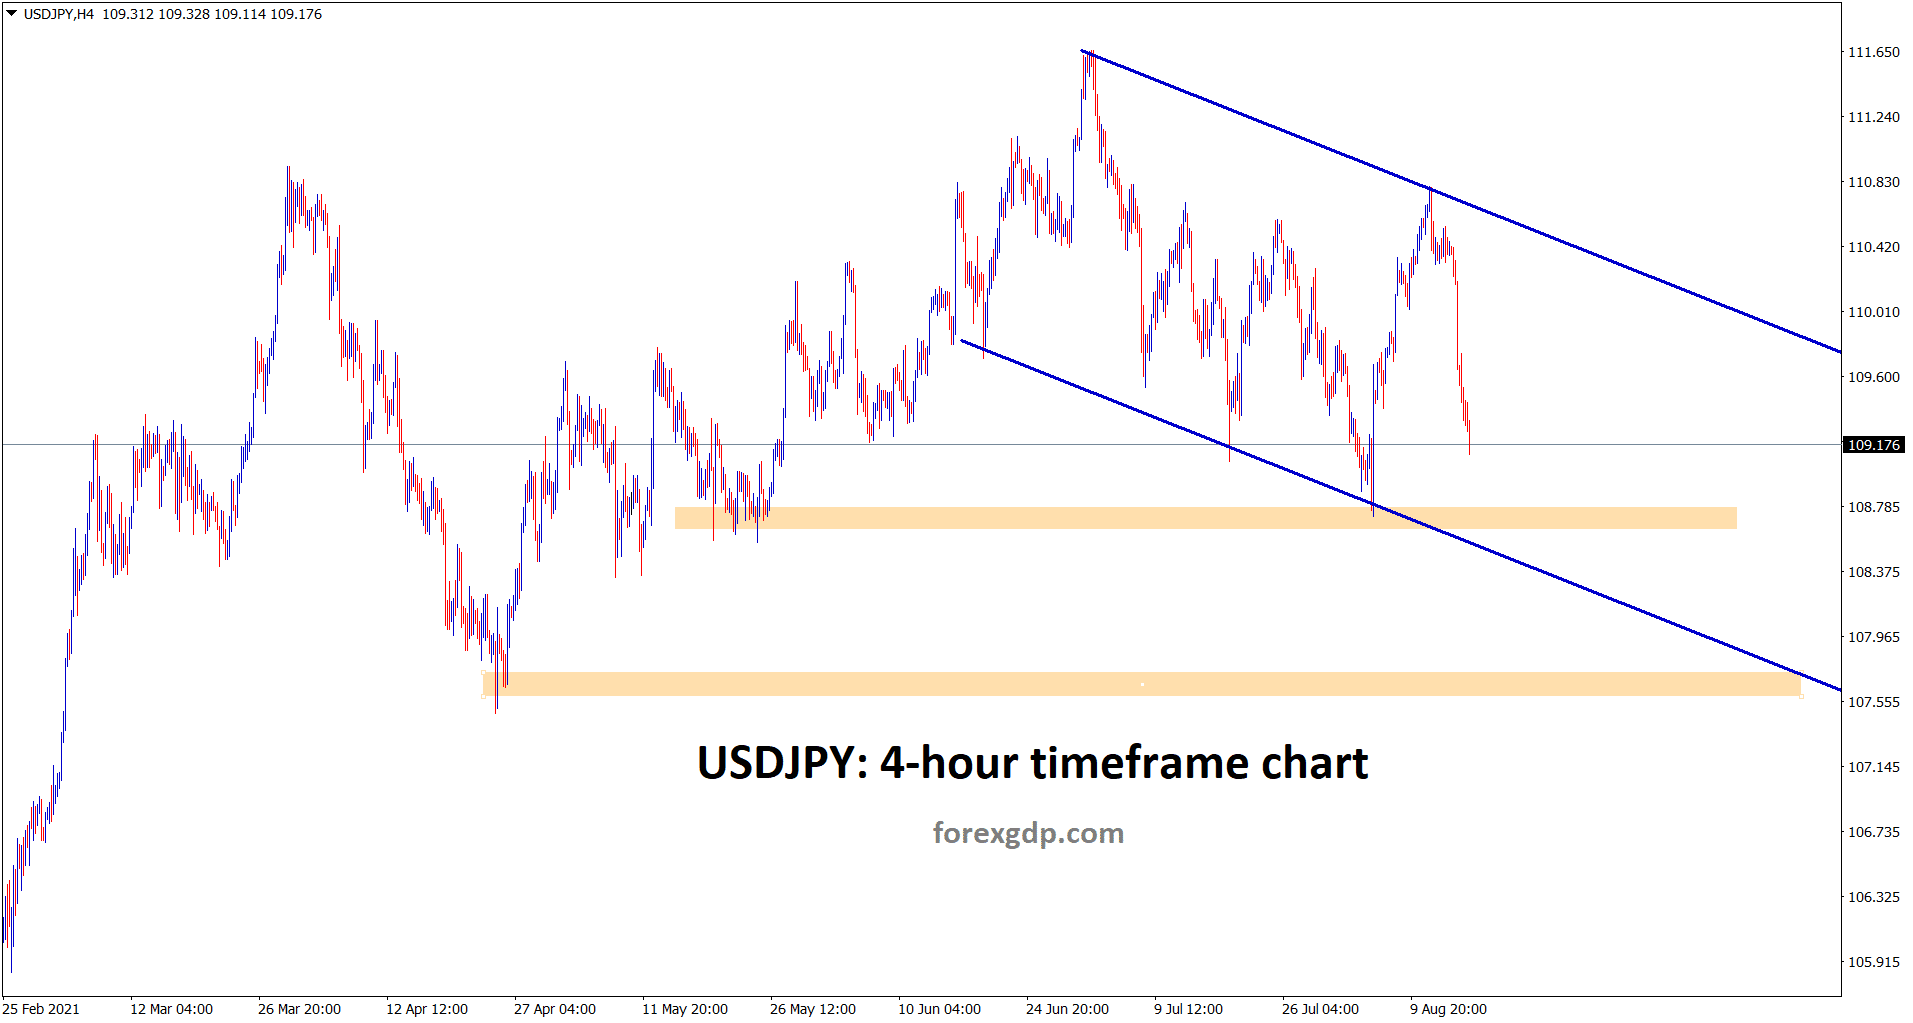 USDJPY is falling down continously in a descending channel range